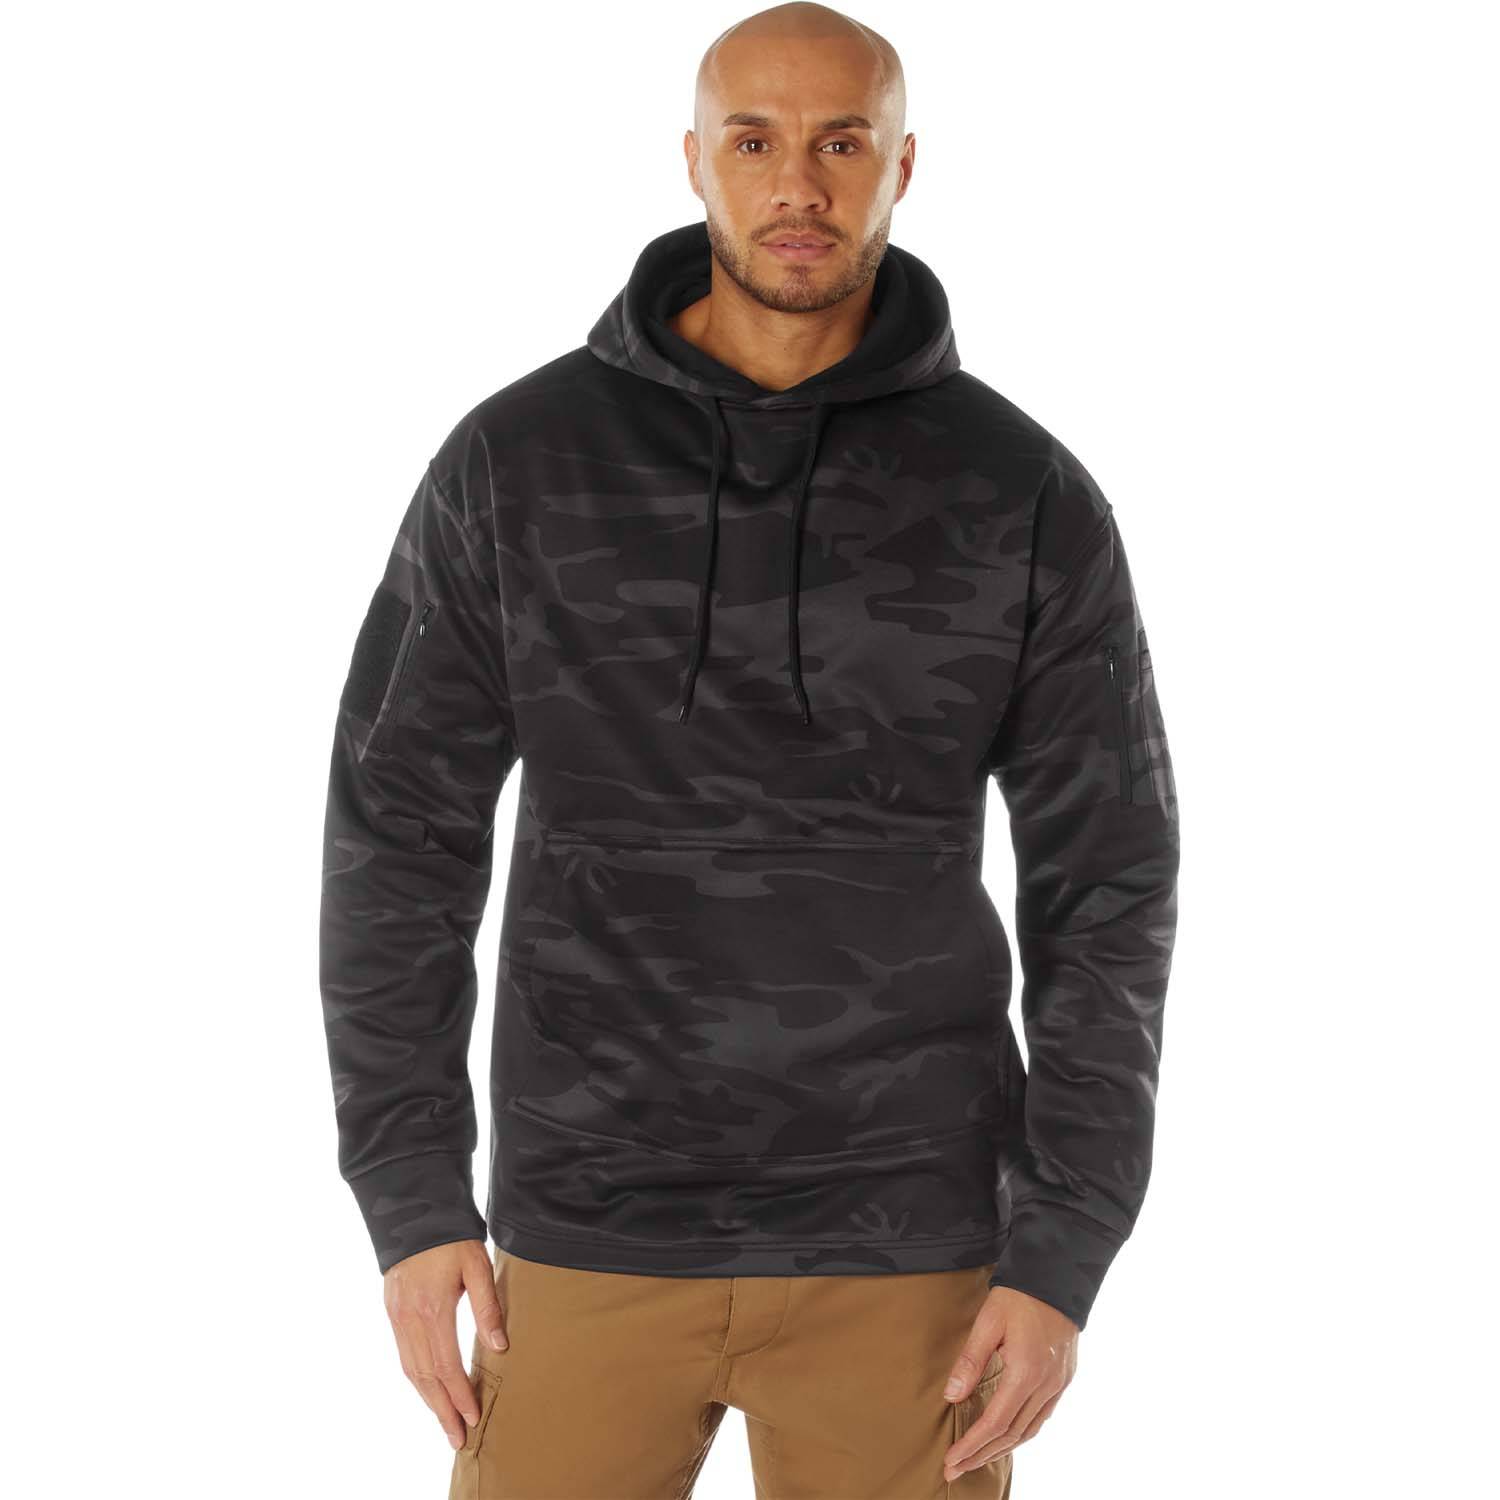 ROTHCO CONCEALED CARRY MIDNIGHT CAMO HOODIE